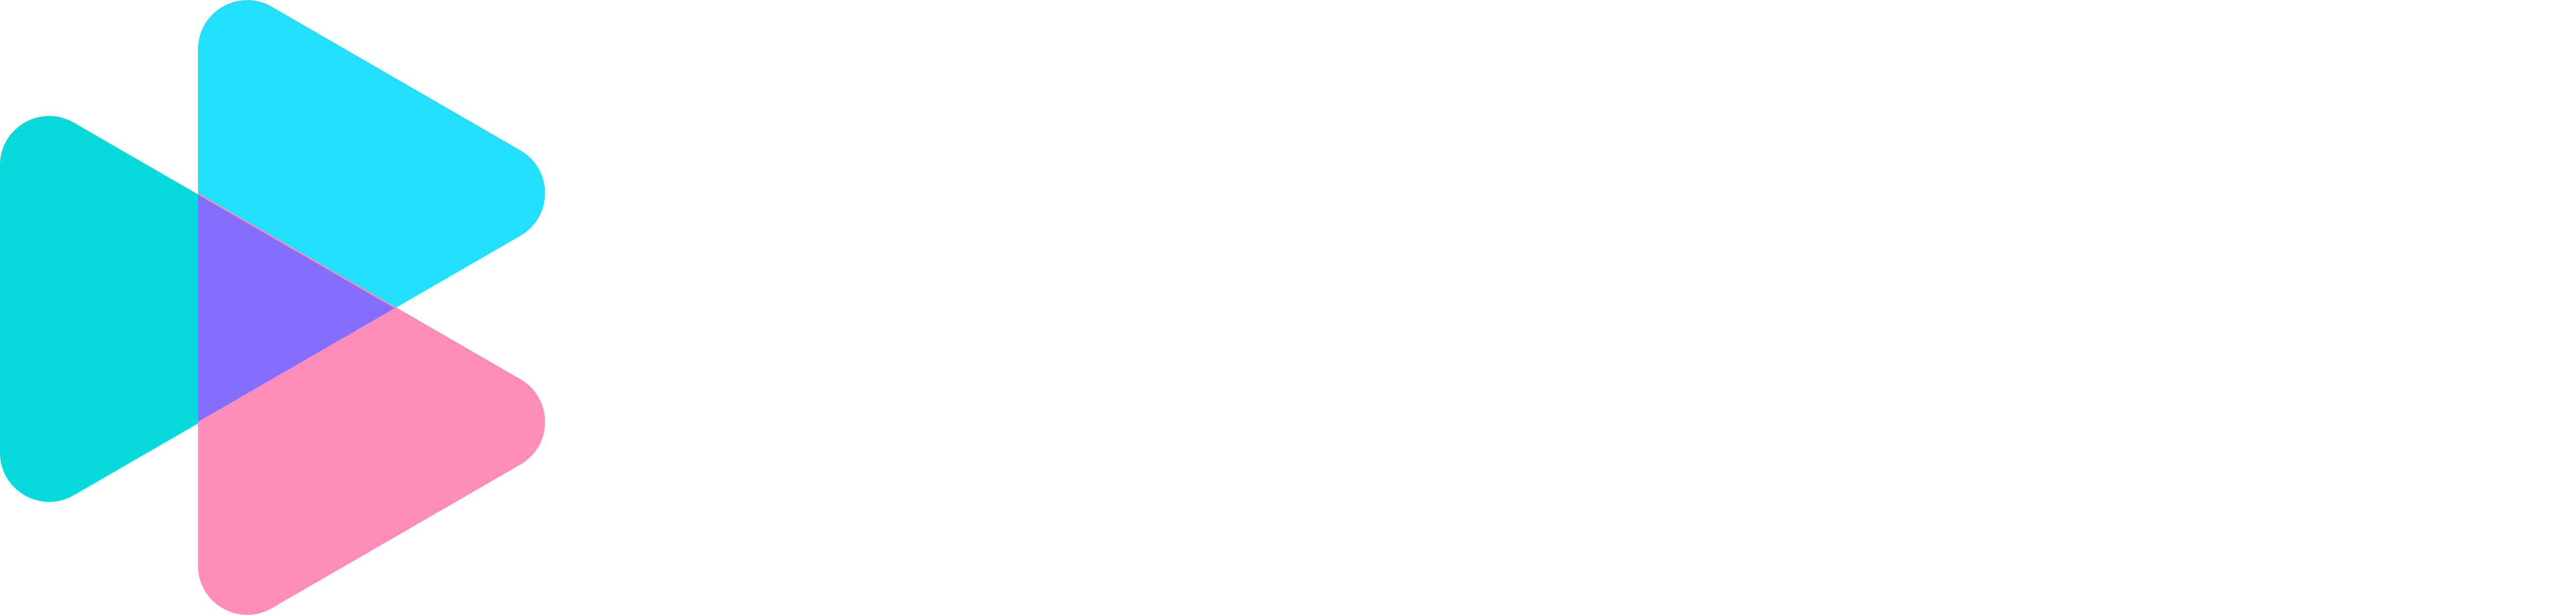 Polygon Marketing Management Logo with Name the the right of the logo and tagline below the name all text in dark blue